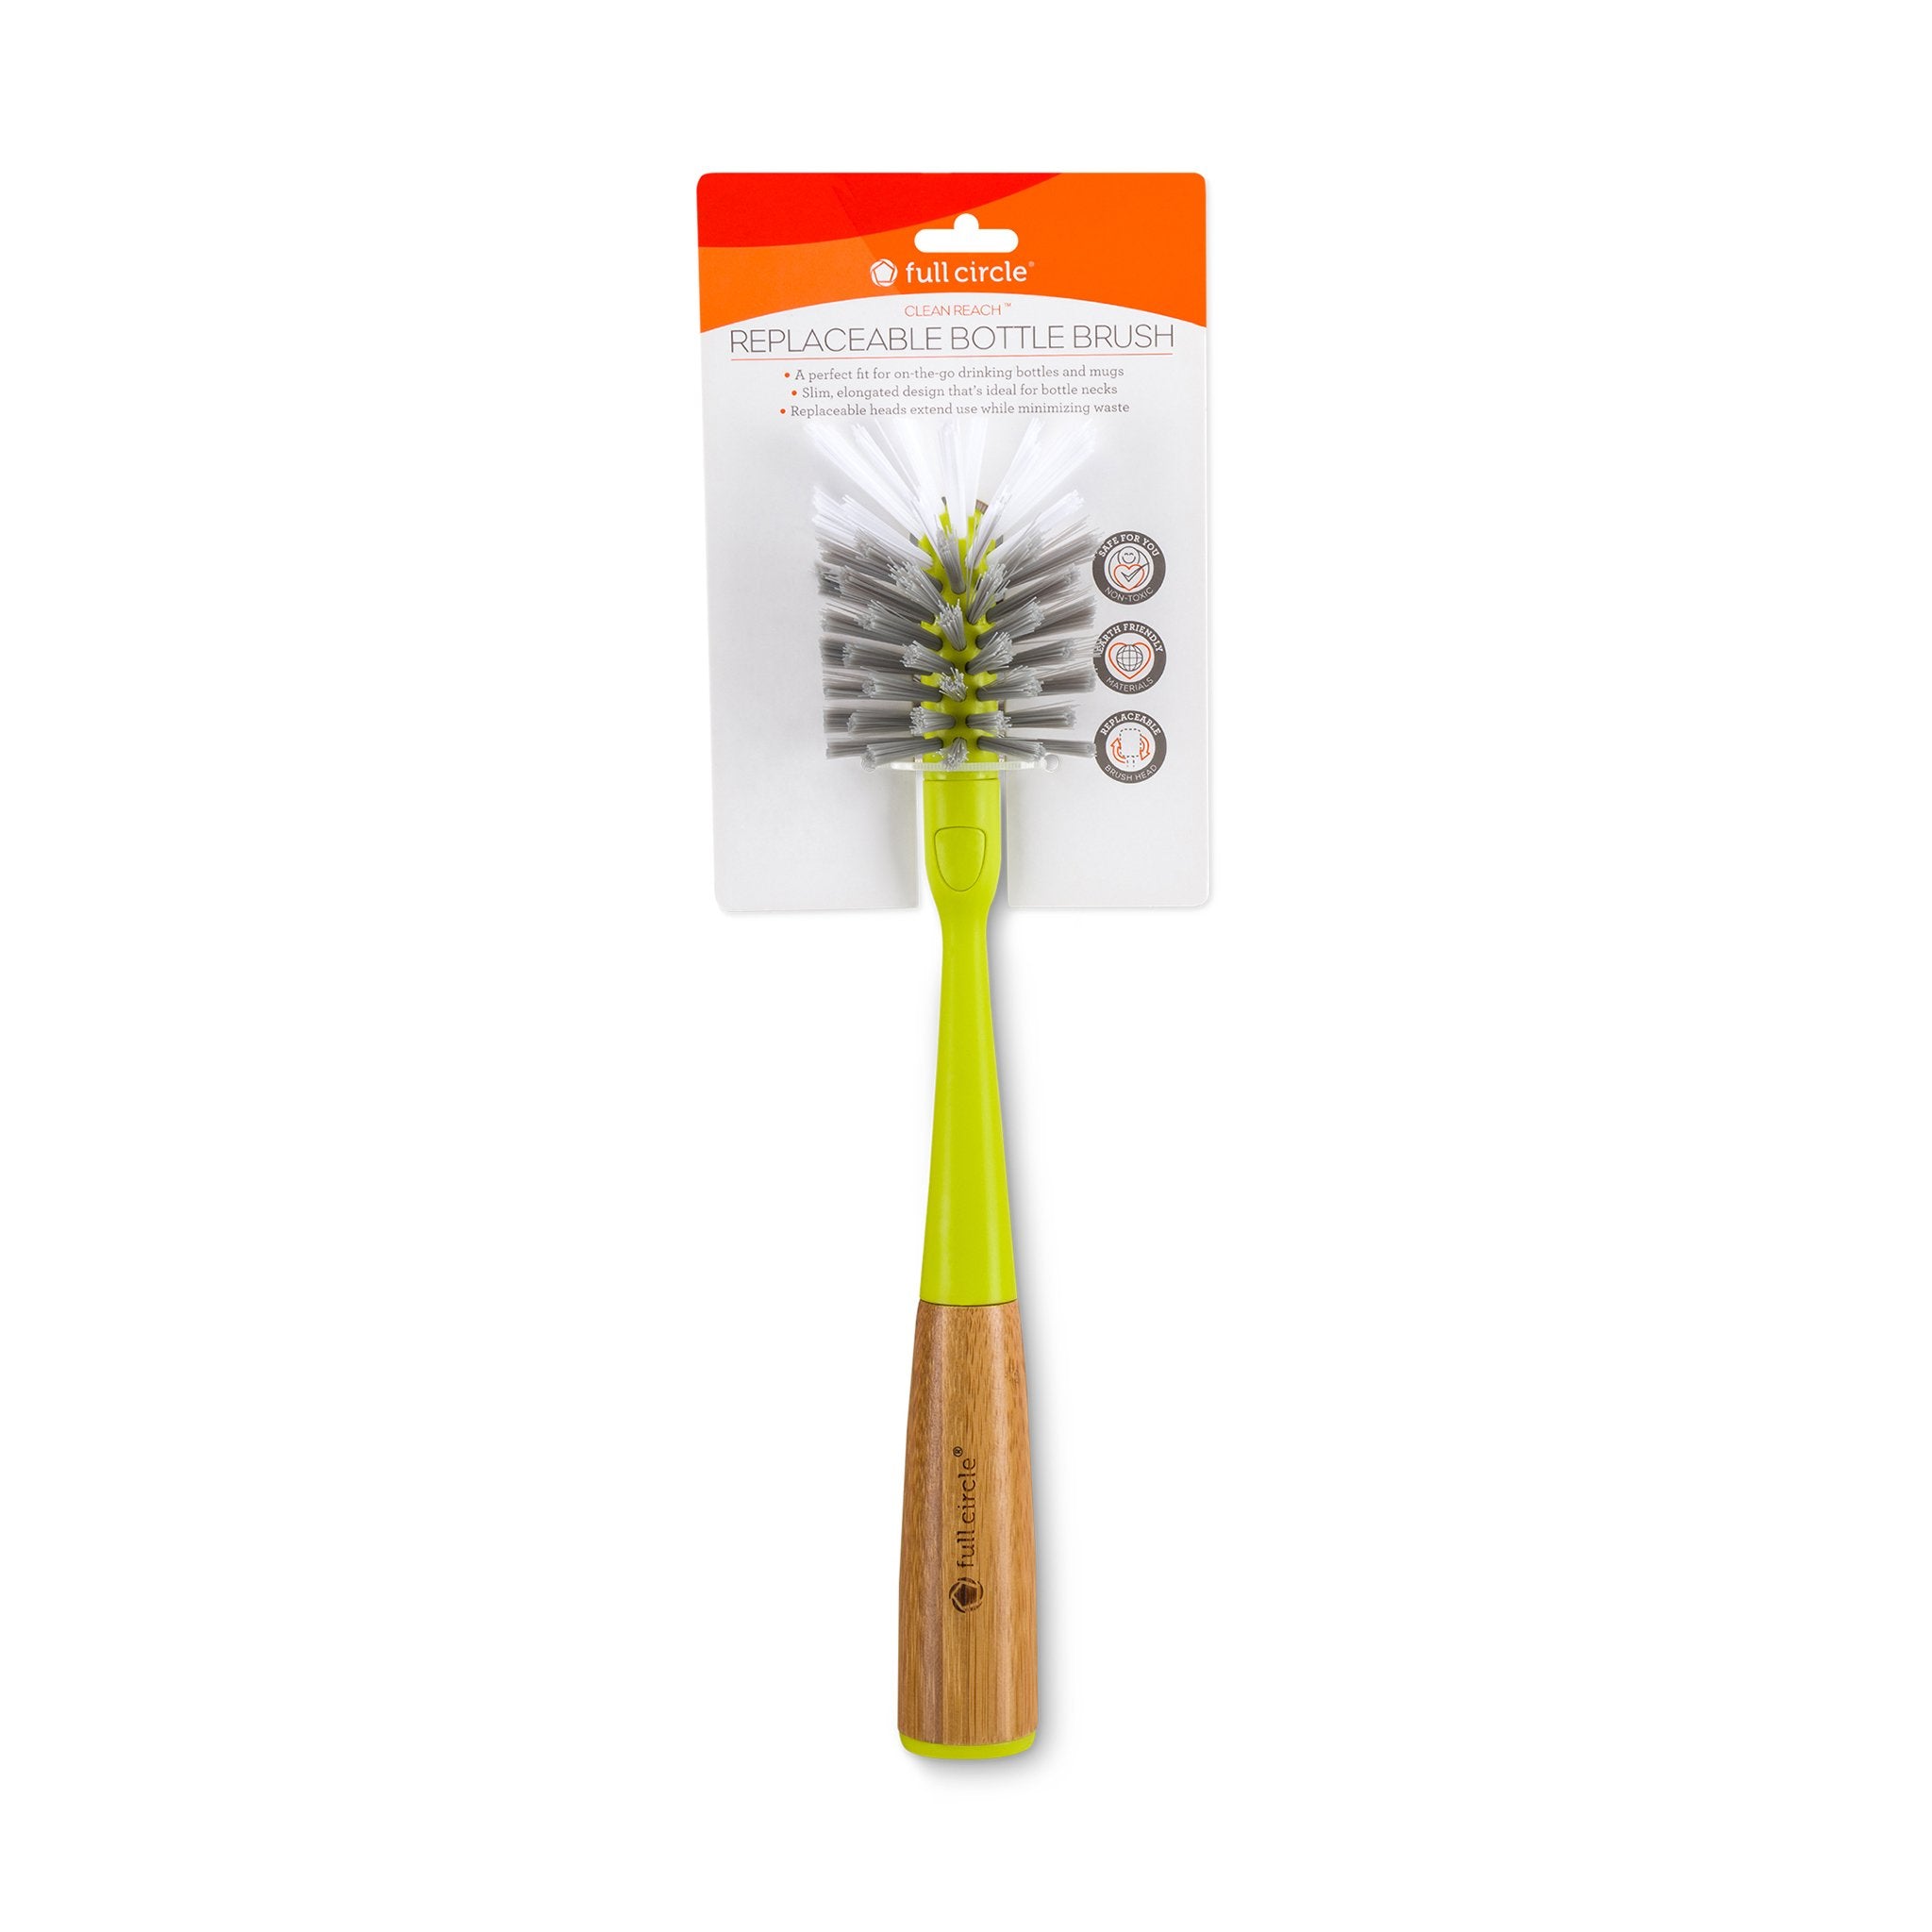 Full Circle Clean Reach Replaceable Head Bottle Brush – Full Circle Home